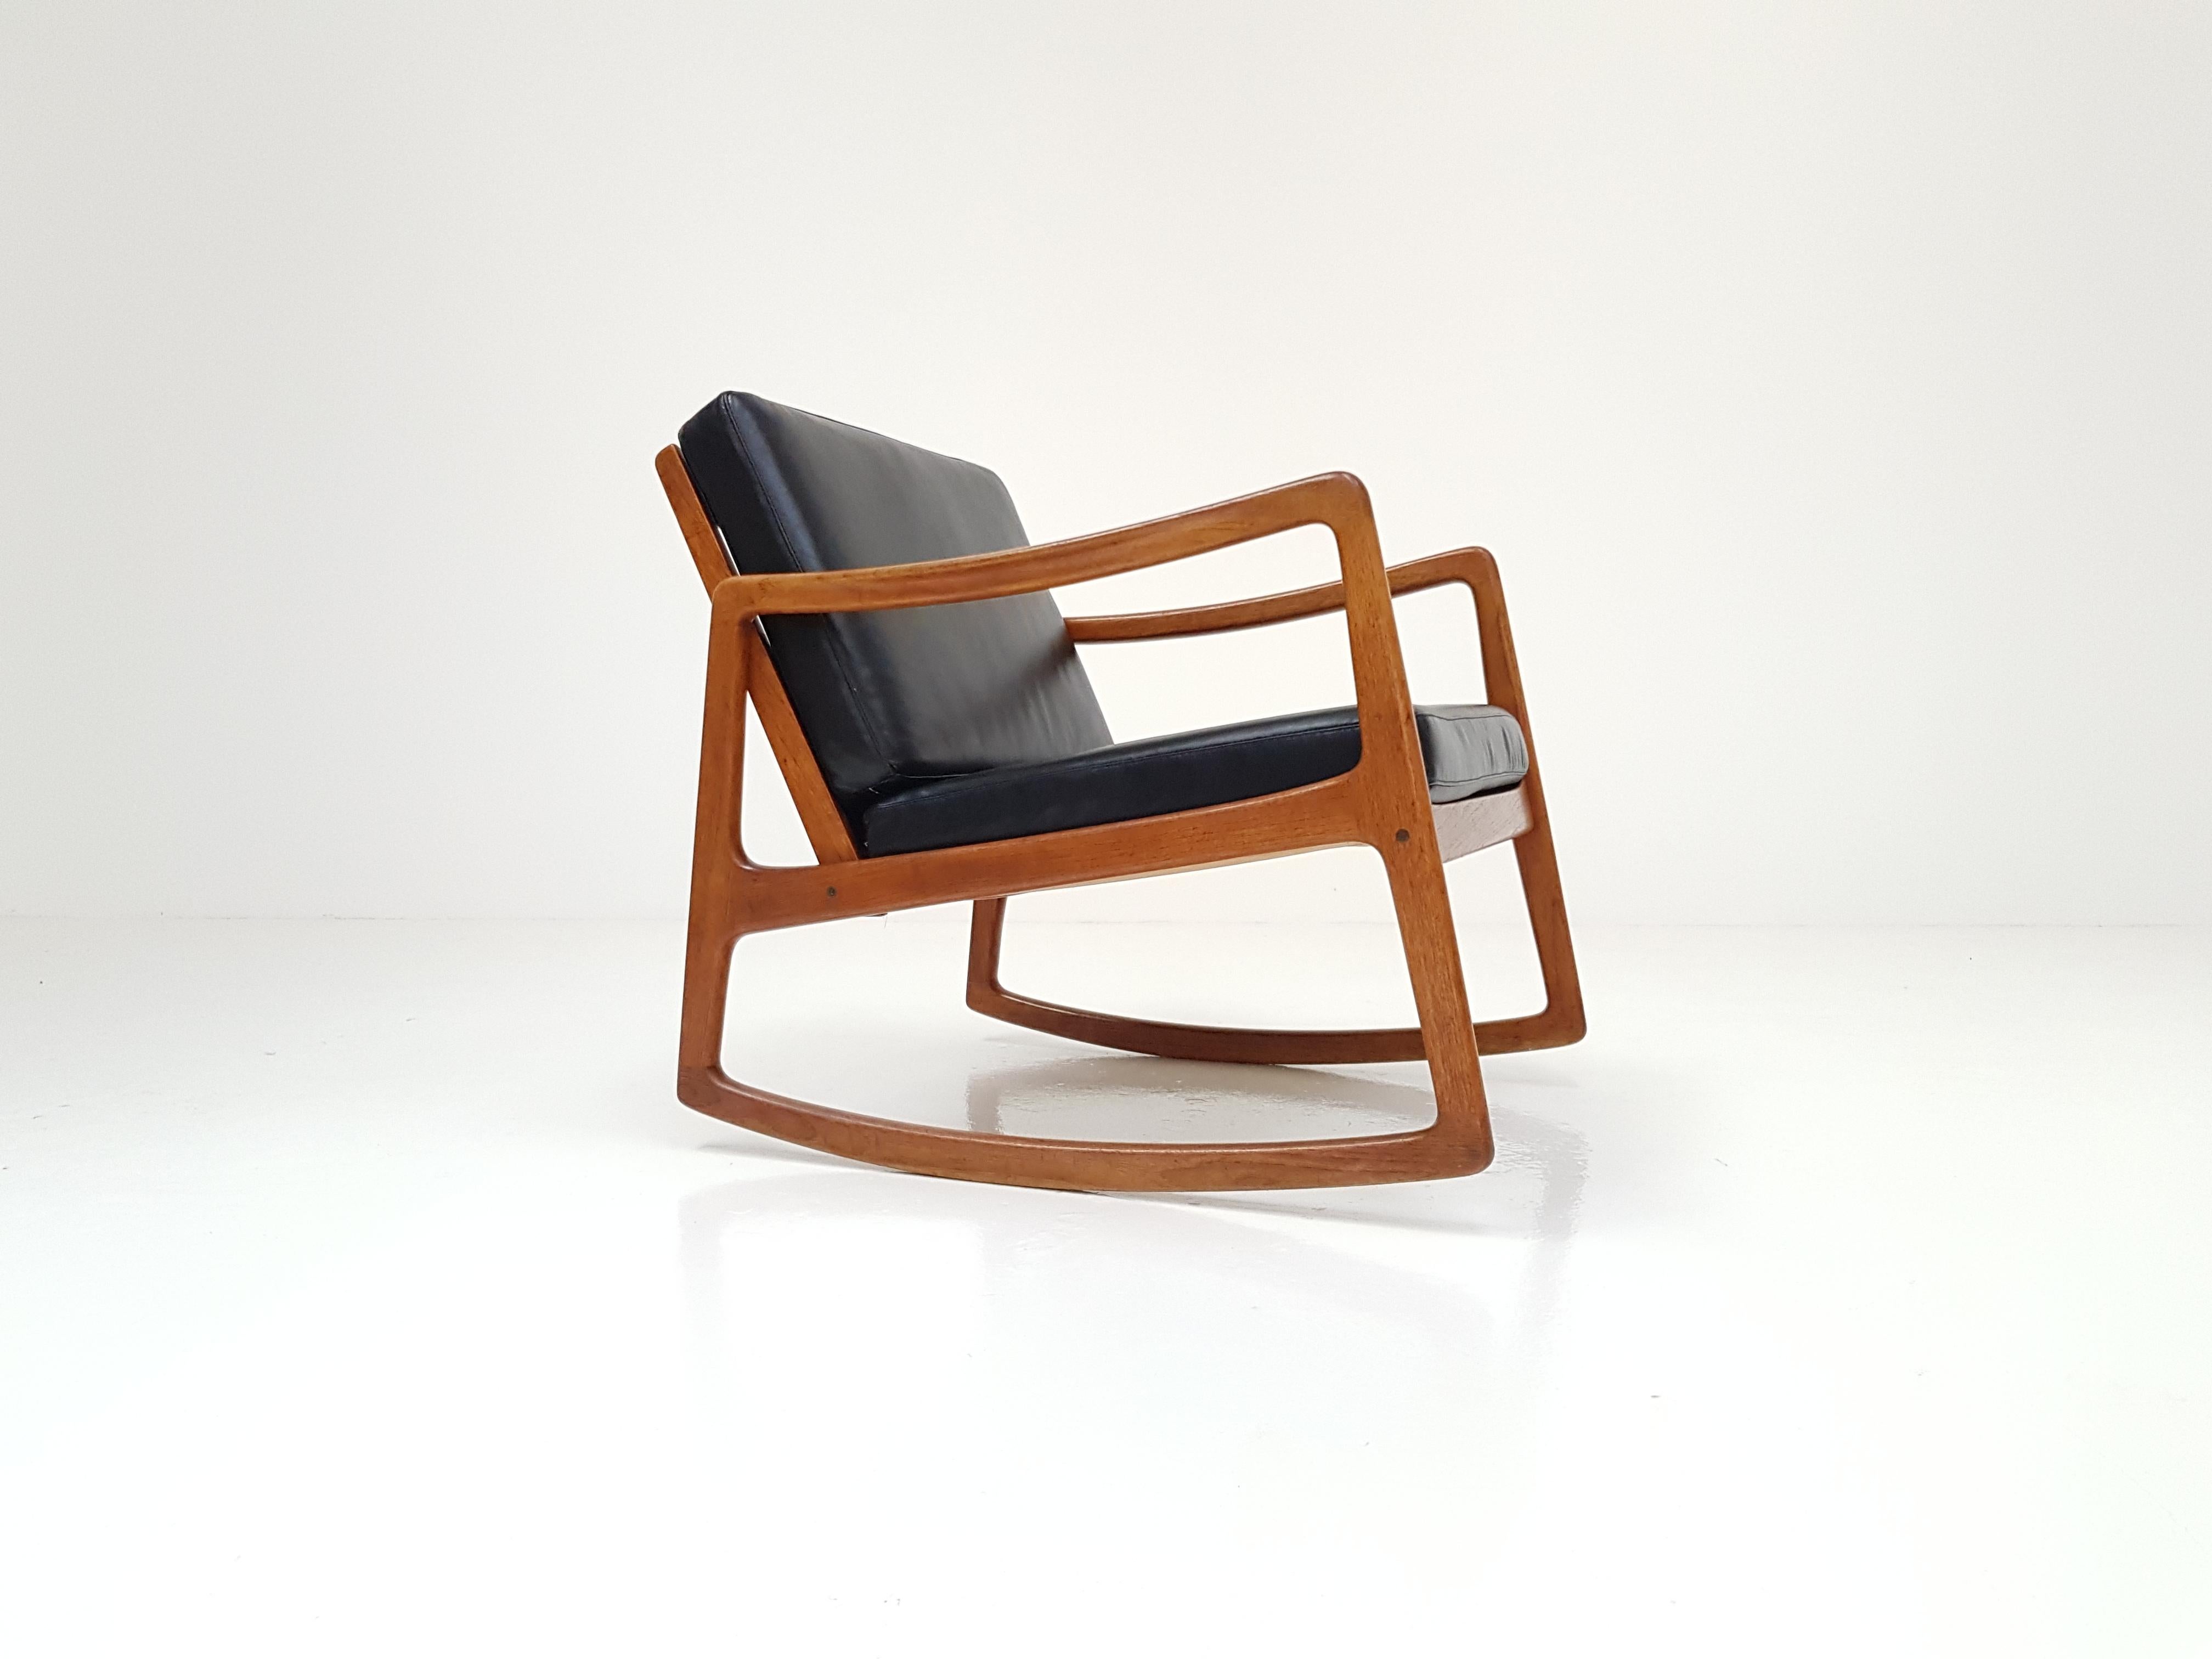 Ole Wanscher for France & Son model 120 teak rocking chair for France & Son in black aniline leather.

The receiver of a 'Good Design' award from MoMA New York. 

A rare Ole Wanscher design dating from 1952 with an amazing minimalist look,